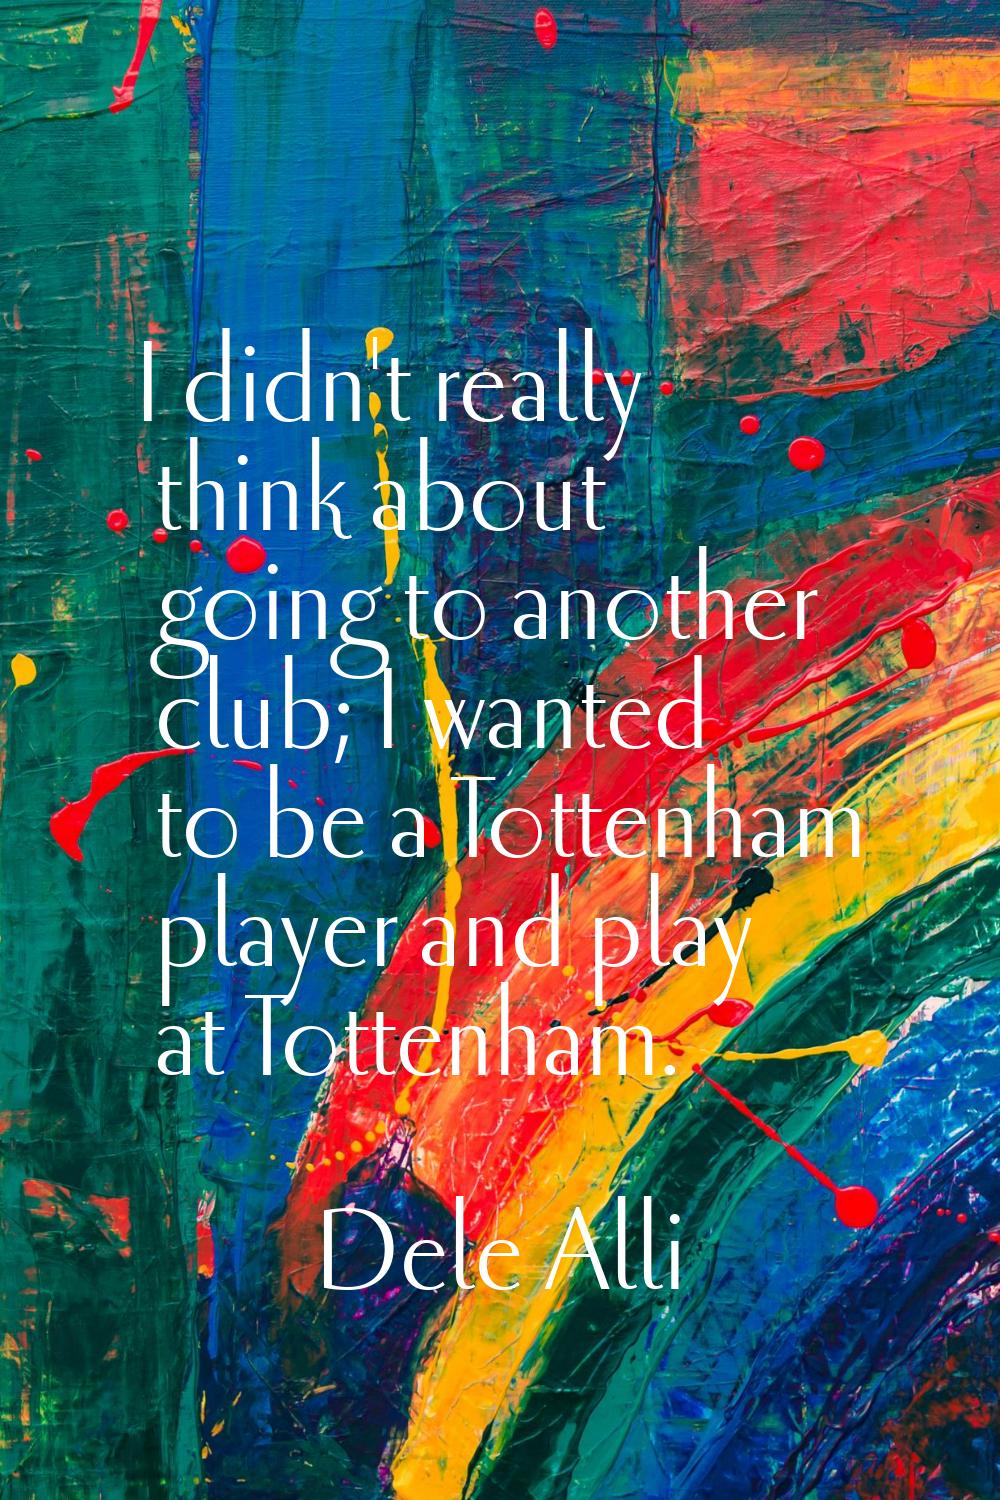 I didn't really think about going to another club; I wanted to be a Tottenham player and play at To